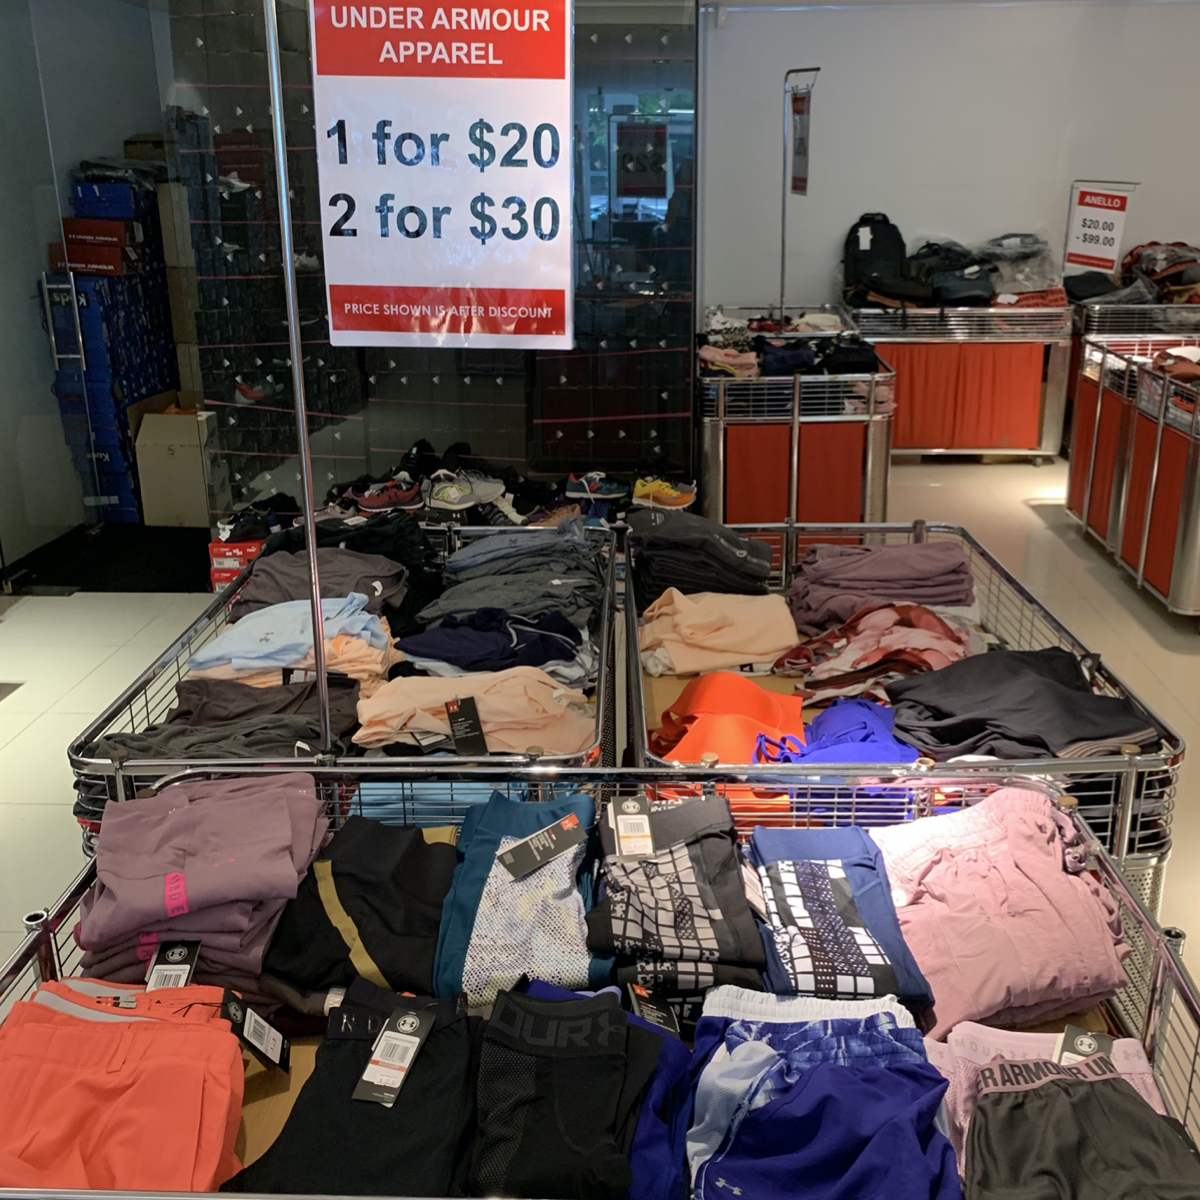 LINK Outlet Sale has up to 80% off branded shoes, bags, accessories & more (30 Jul – 2 Aug 2020 ...